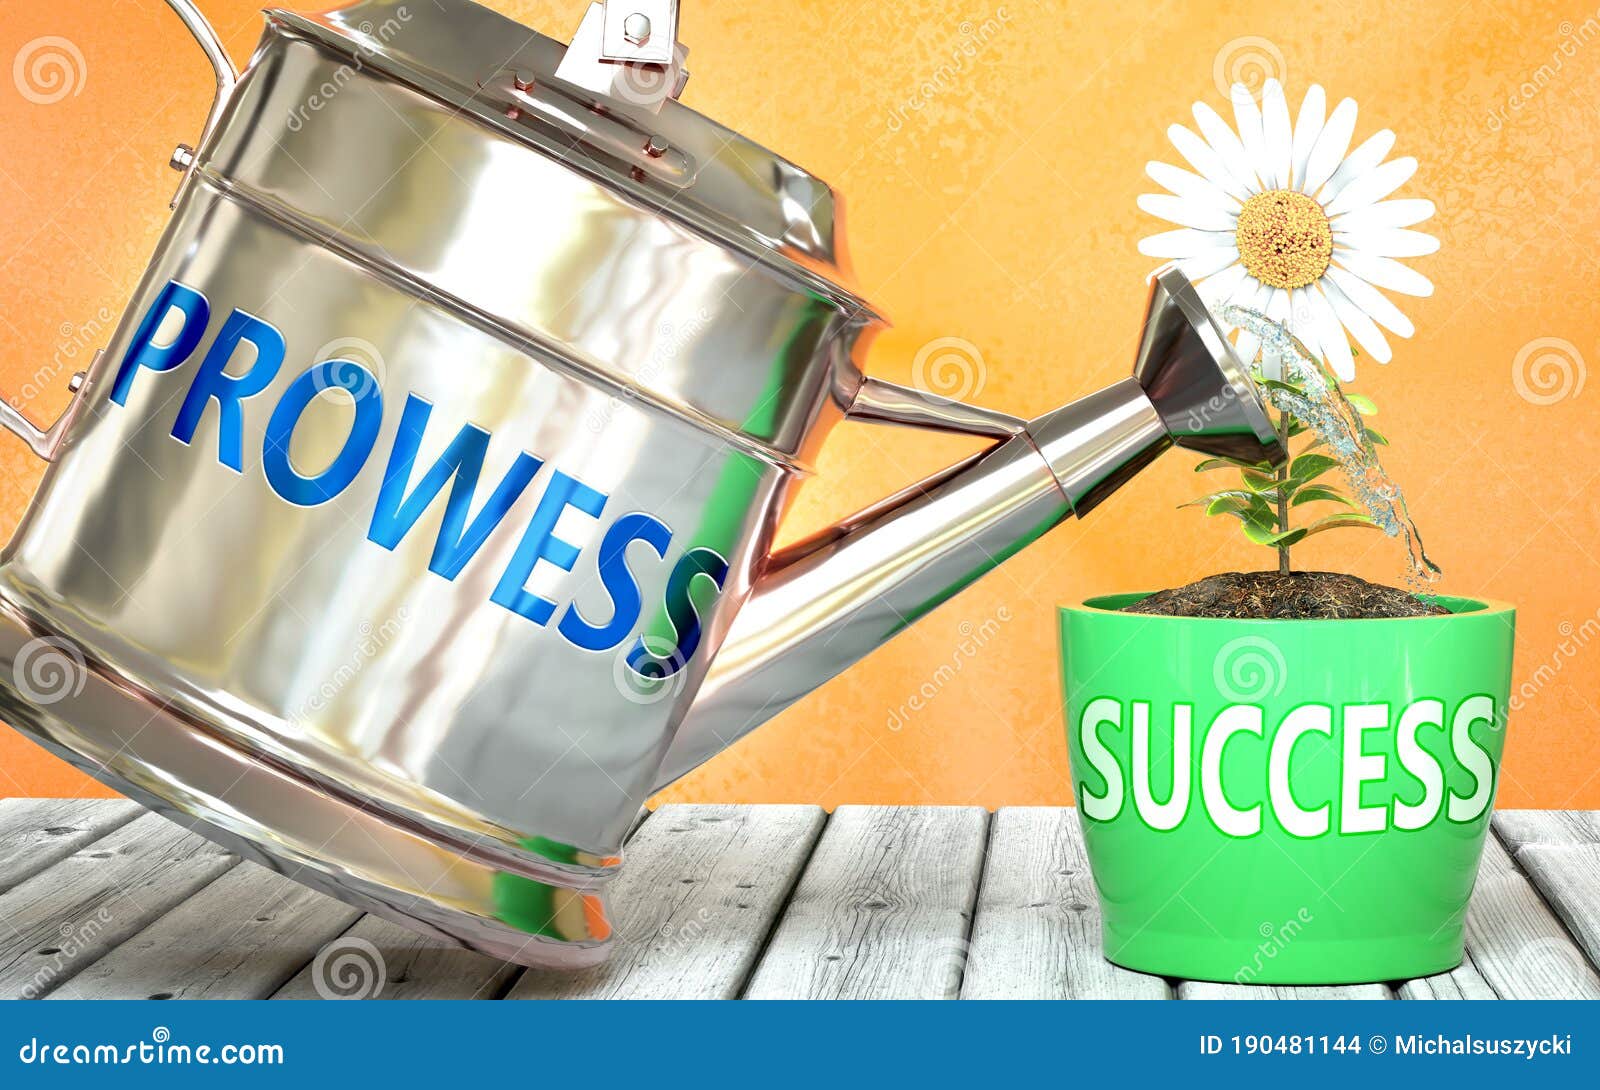 prowess helps achieving success - pictured as word prowess on a watering can to ize that prowess makes success grow and it